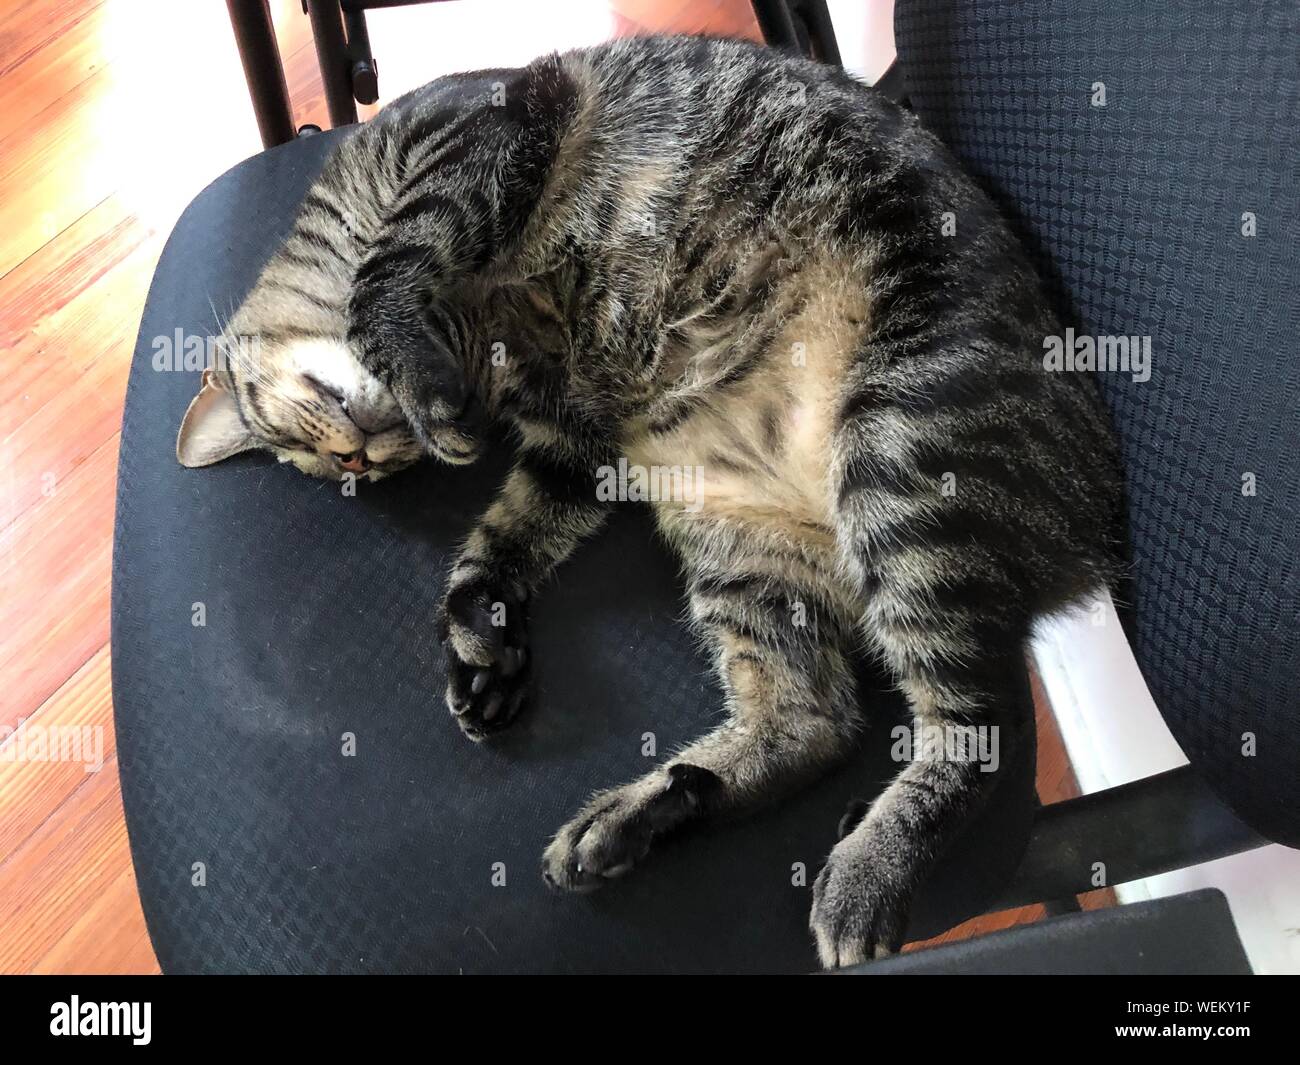 One of the pampered cats sleeping in a chair at the Ernest Hemingway house in Key West, Florida. Stock Photo